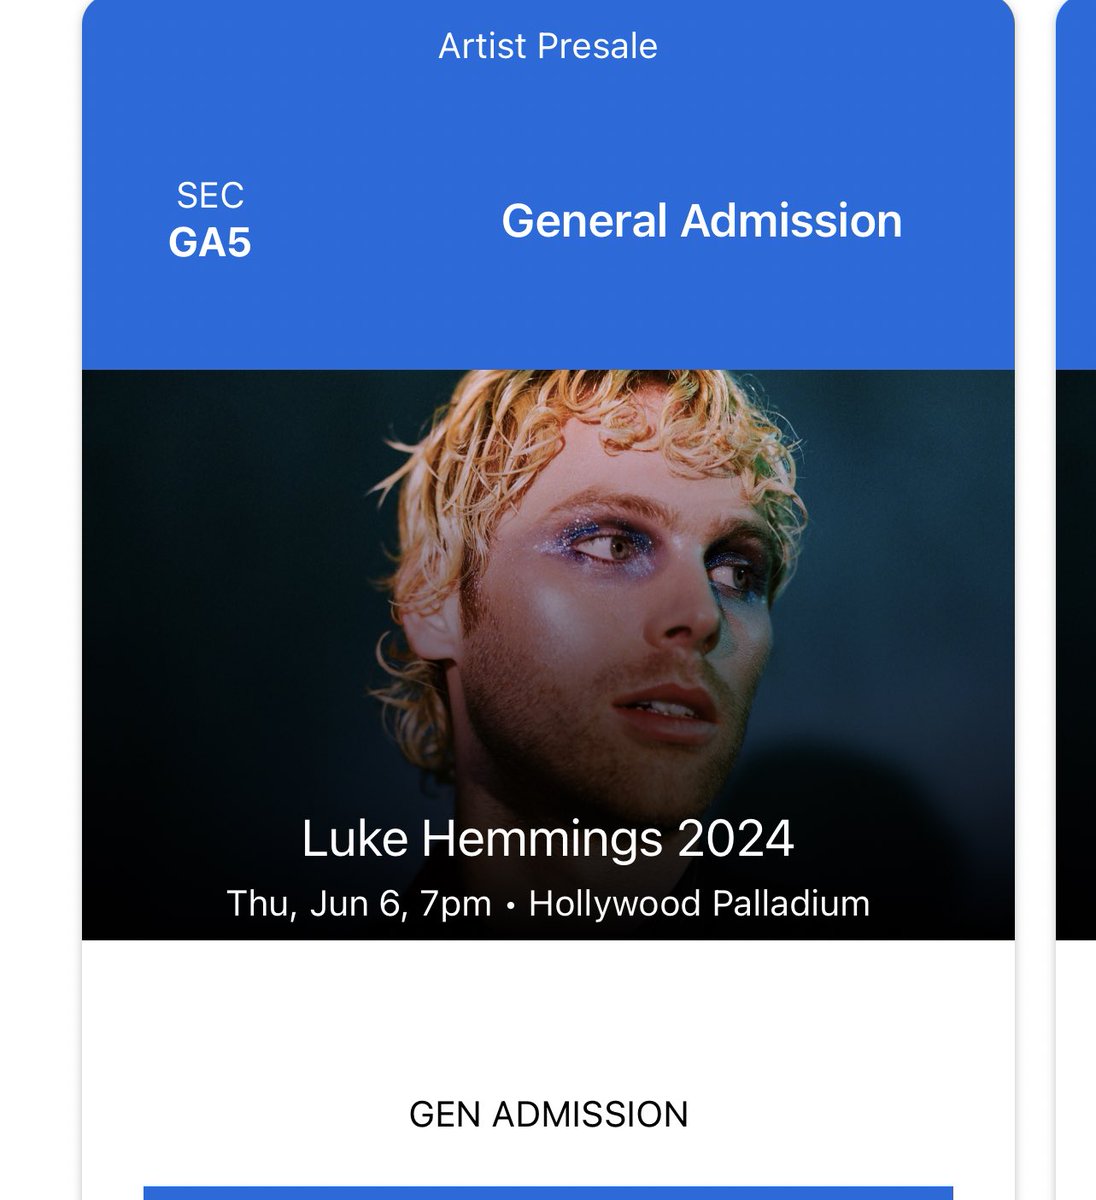 Won’t be able to make it😔 so selling 2 tickets to Luke’s show in LA #nostalgiaforatimethatneverexisted #LukeHemmings #hollywoodpalladium #ticketsforsale